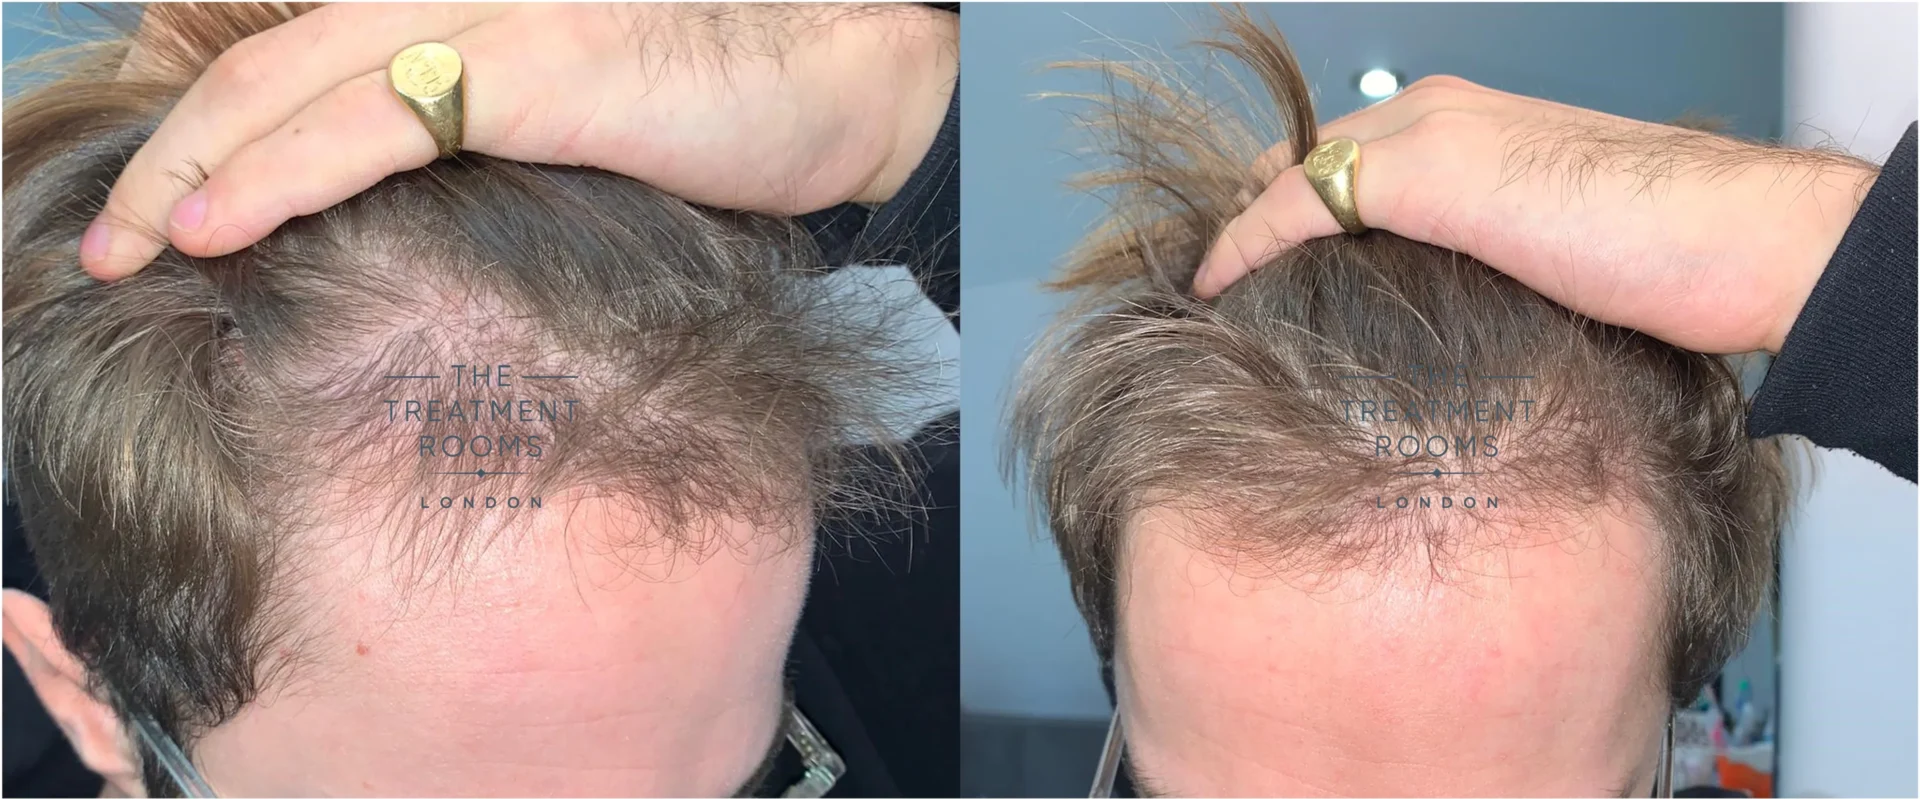 Unshaven hair transplant month 6 after surgery